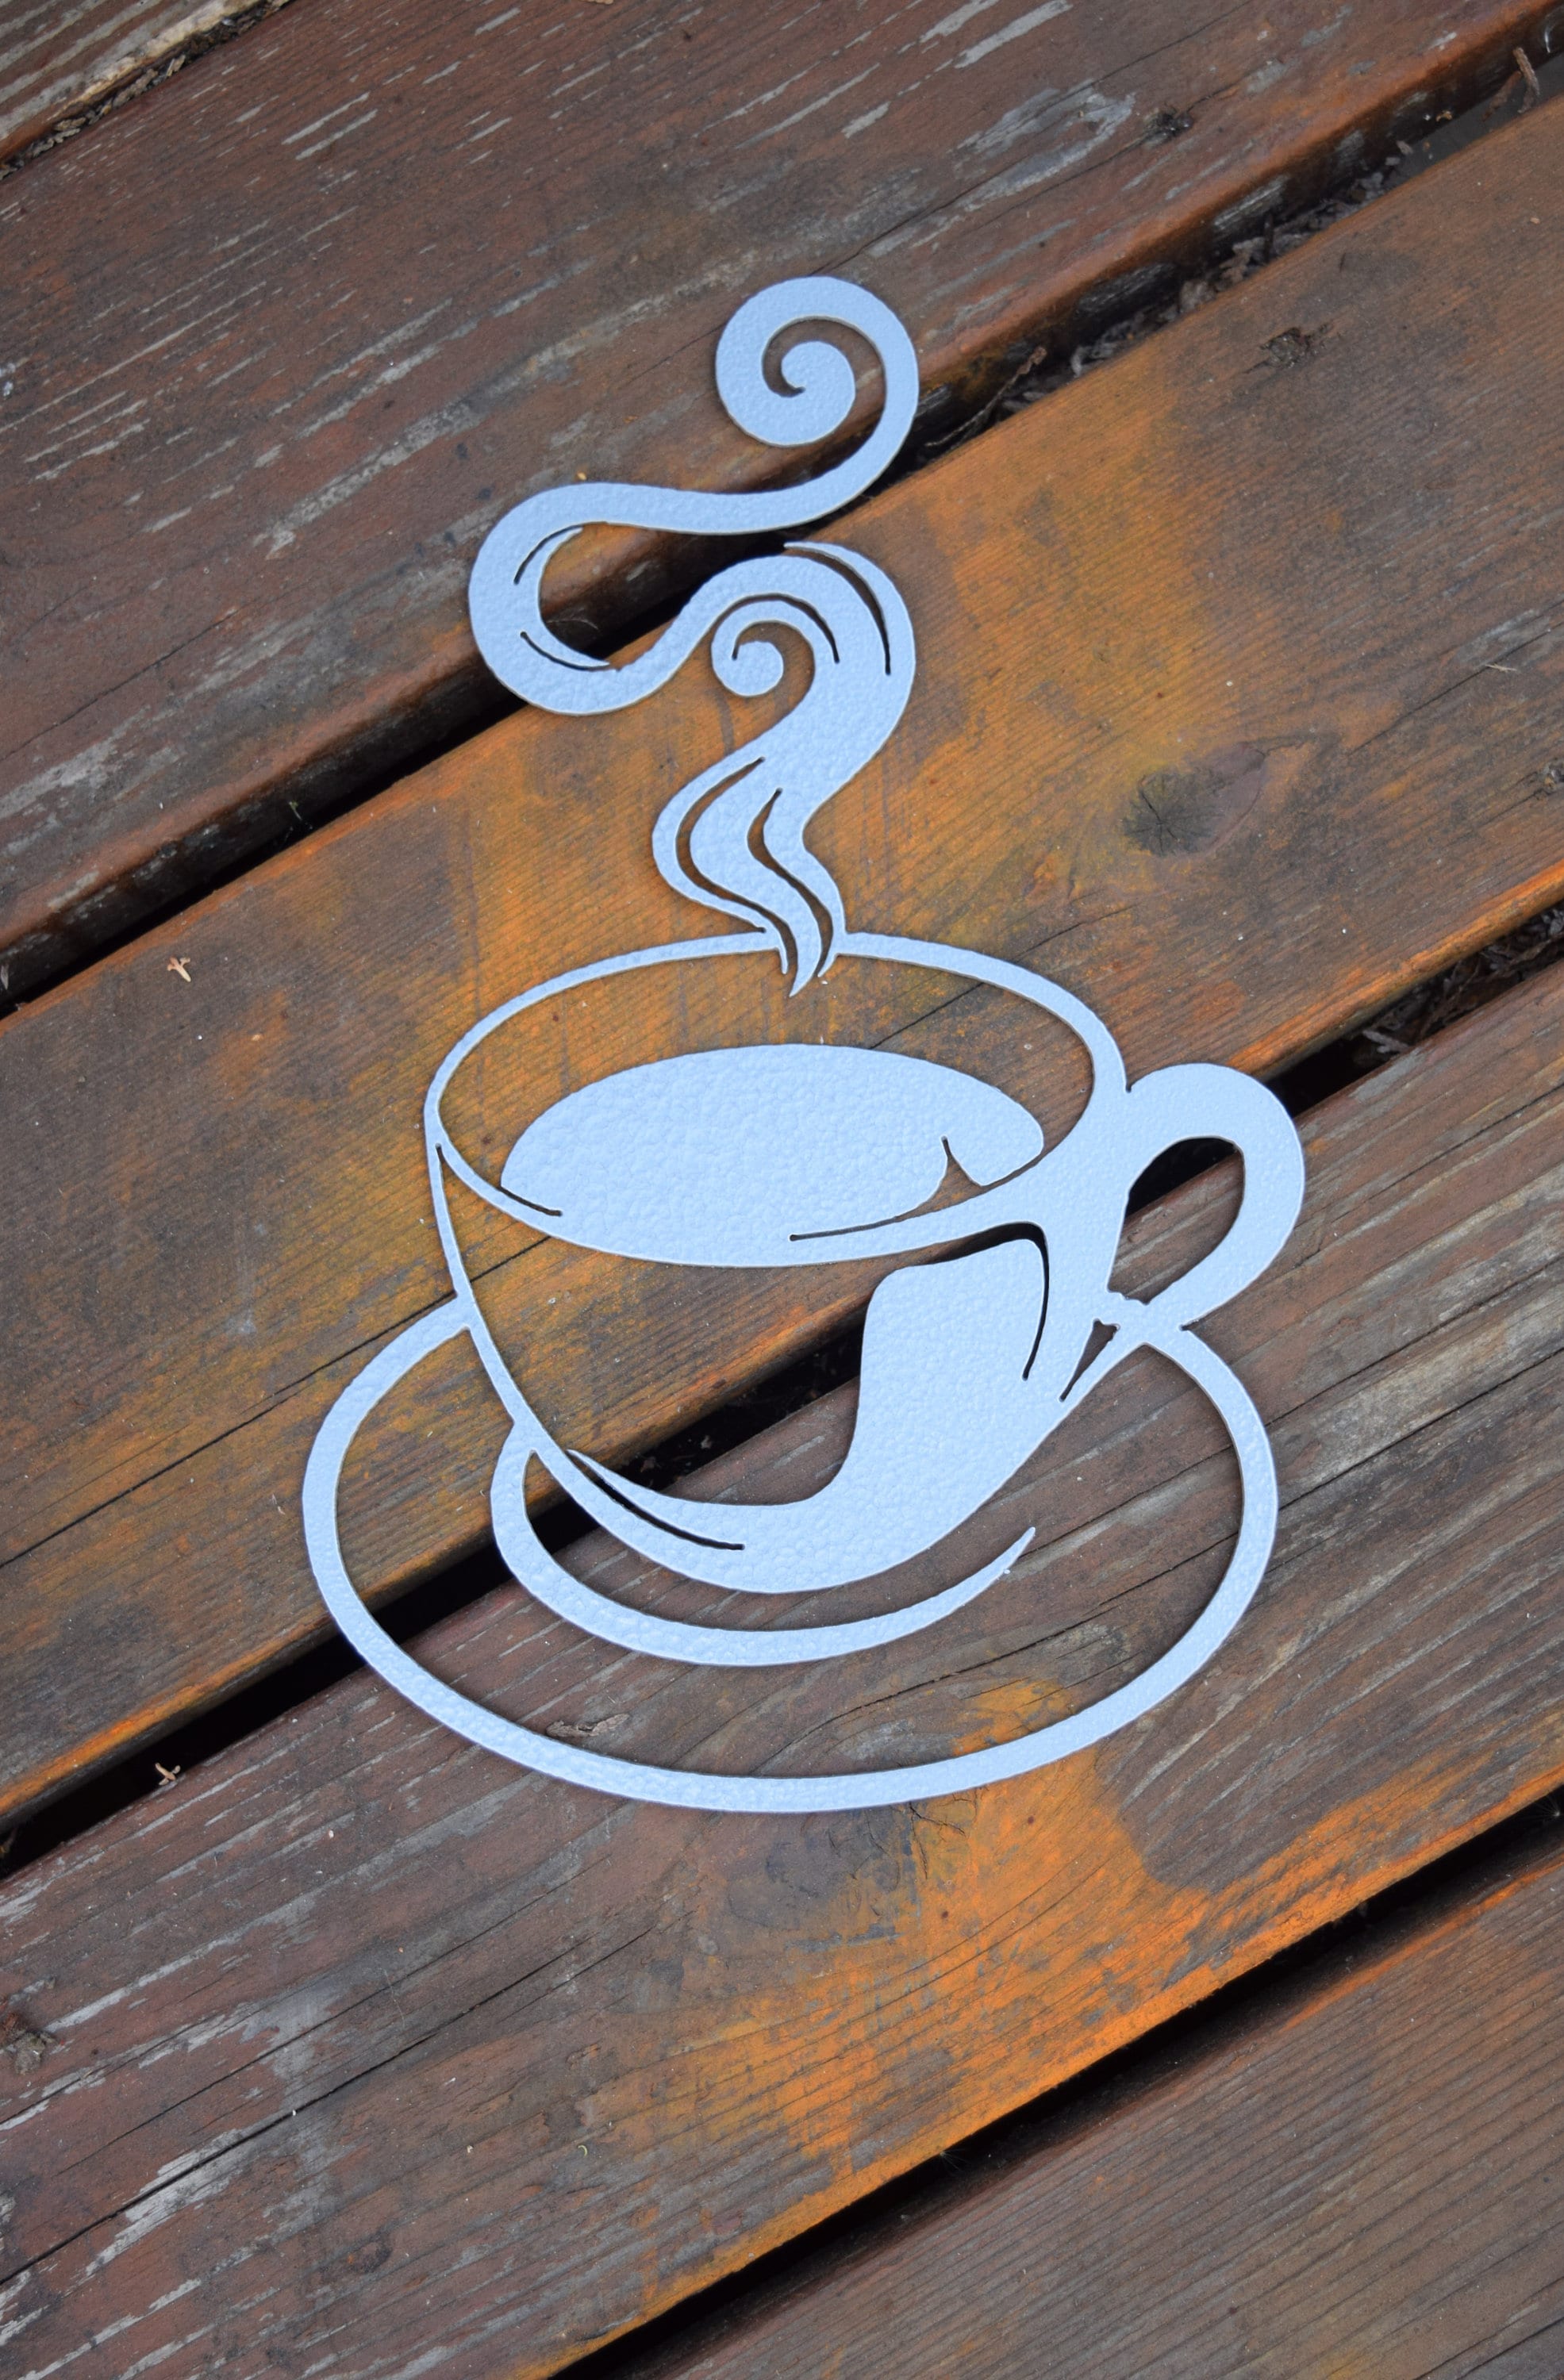 Stunning Hammered Silver Painted Steel Coffee Cup Cutout - Ideal Decor for Coffee Lovers, Shimmering Metallic Finish, Unique Coffee Art for Home or Café.